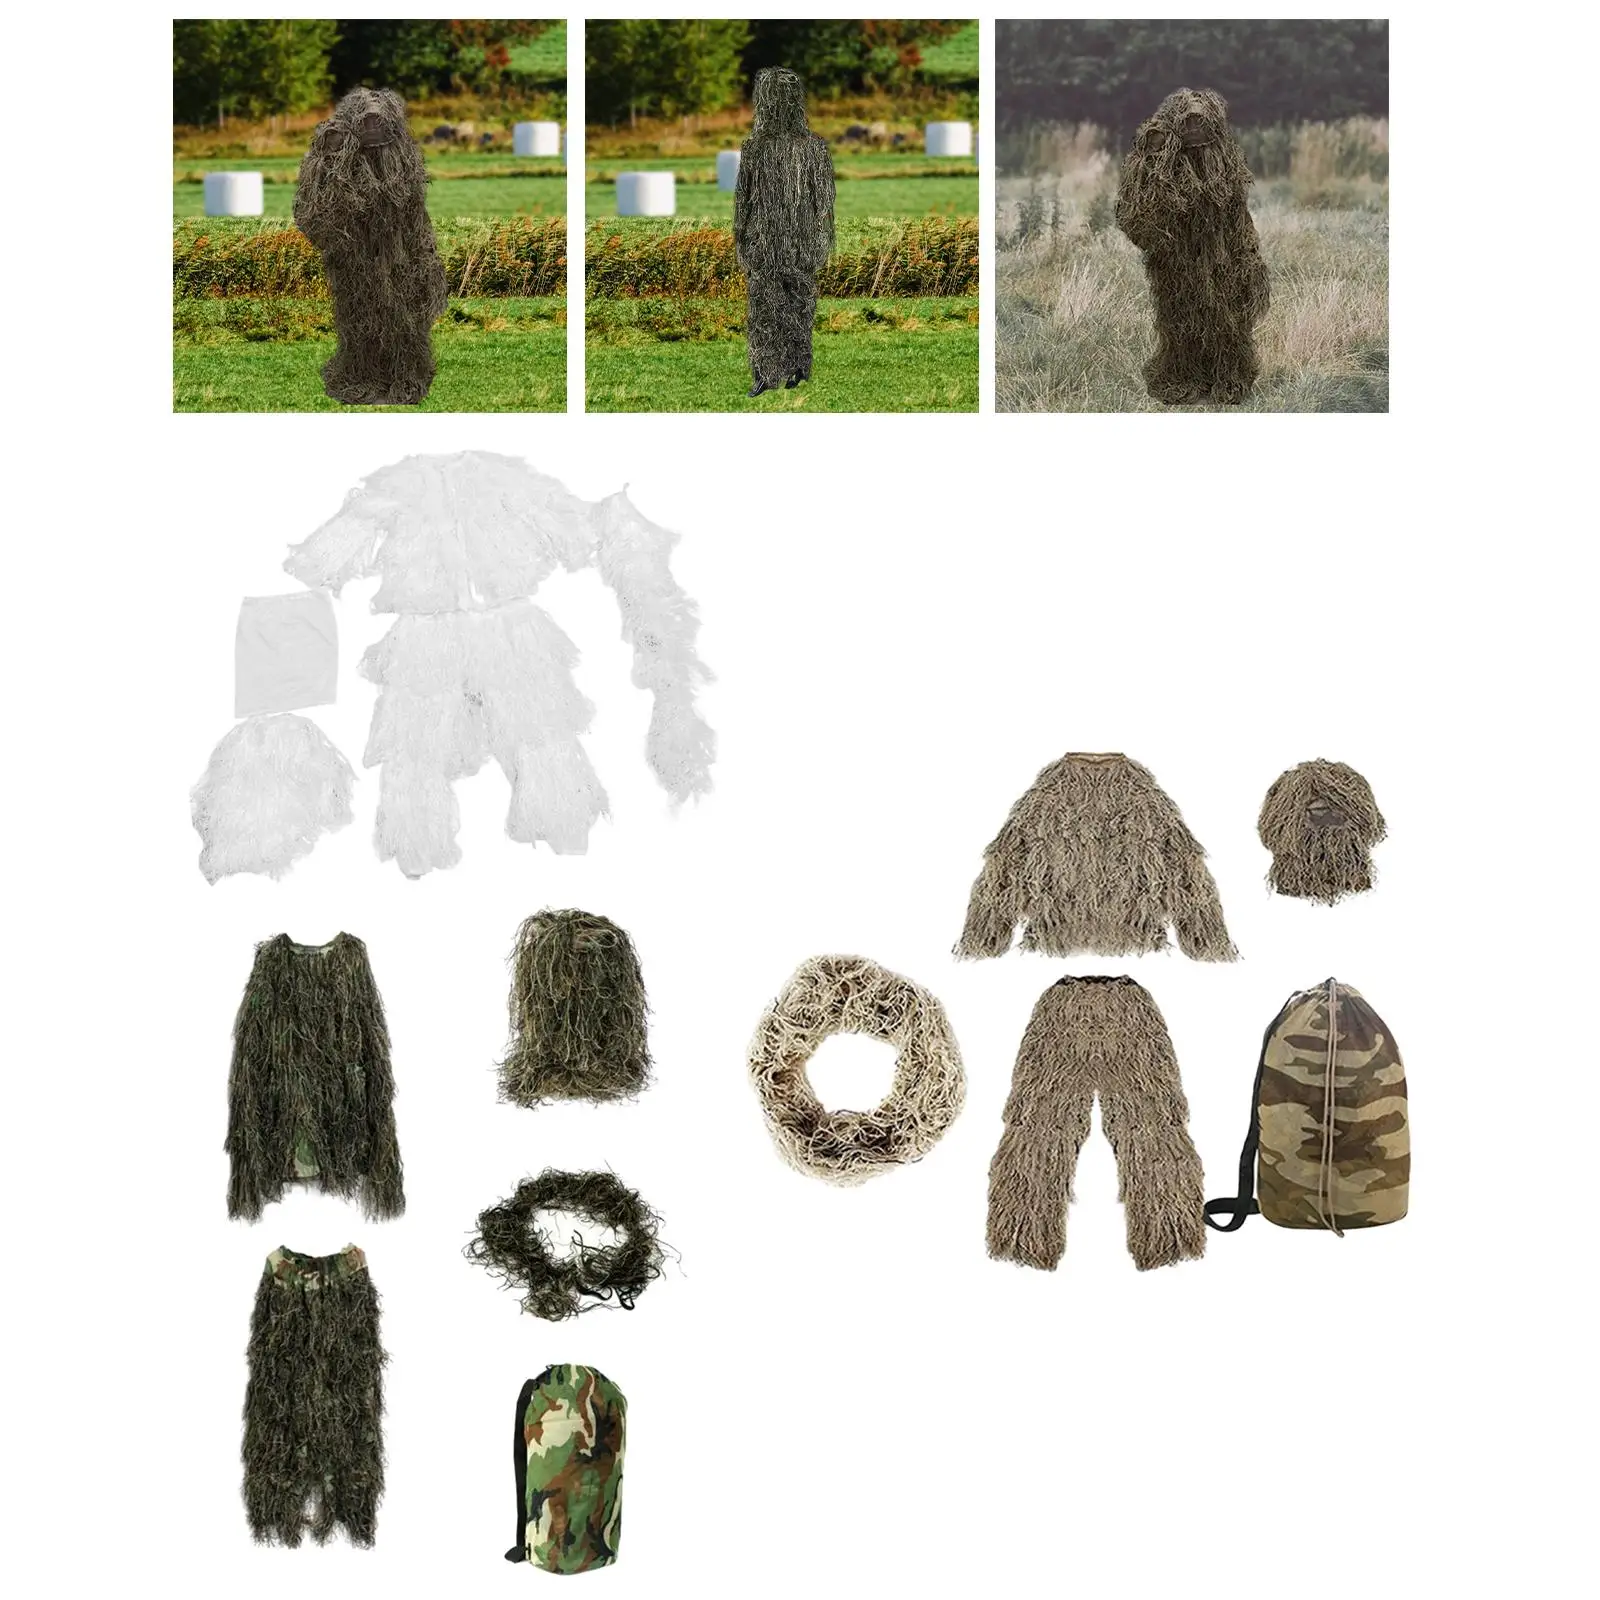 Kids Ghillie Suit Clothes Jacket Lightweight Clothing Uniform Set Costume for Game Halloween Birdwatching Party Accessories